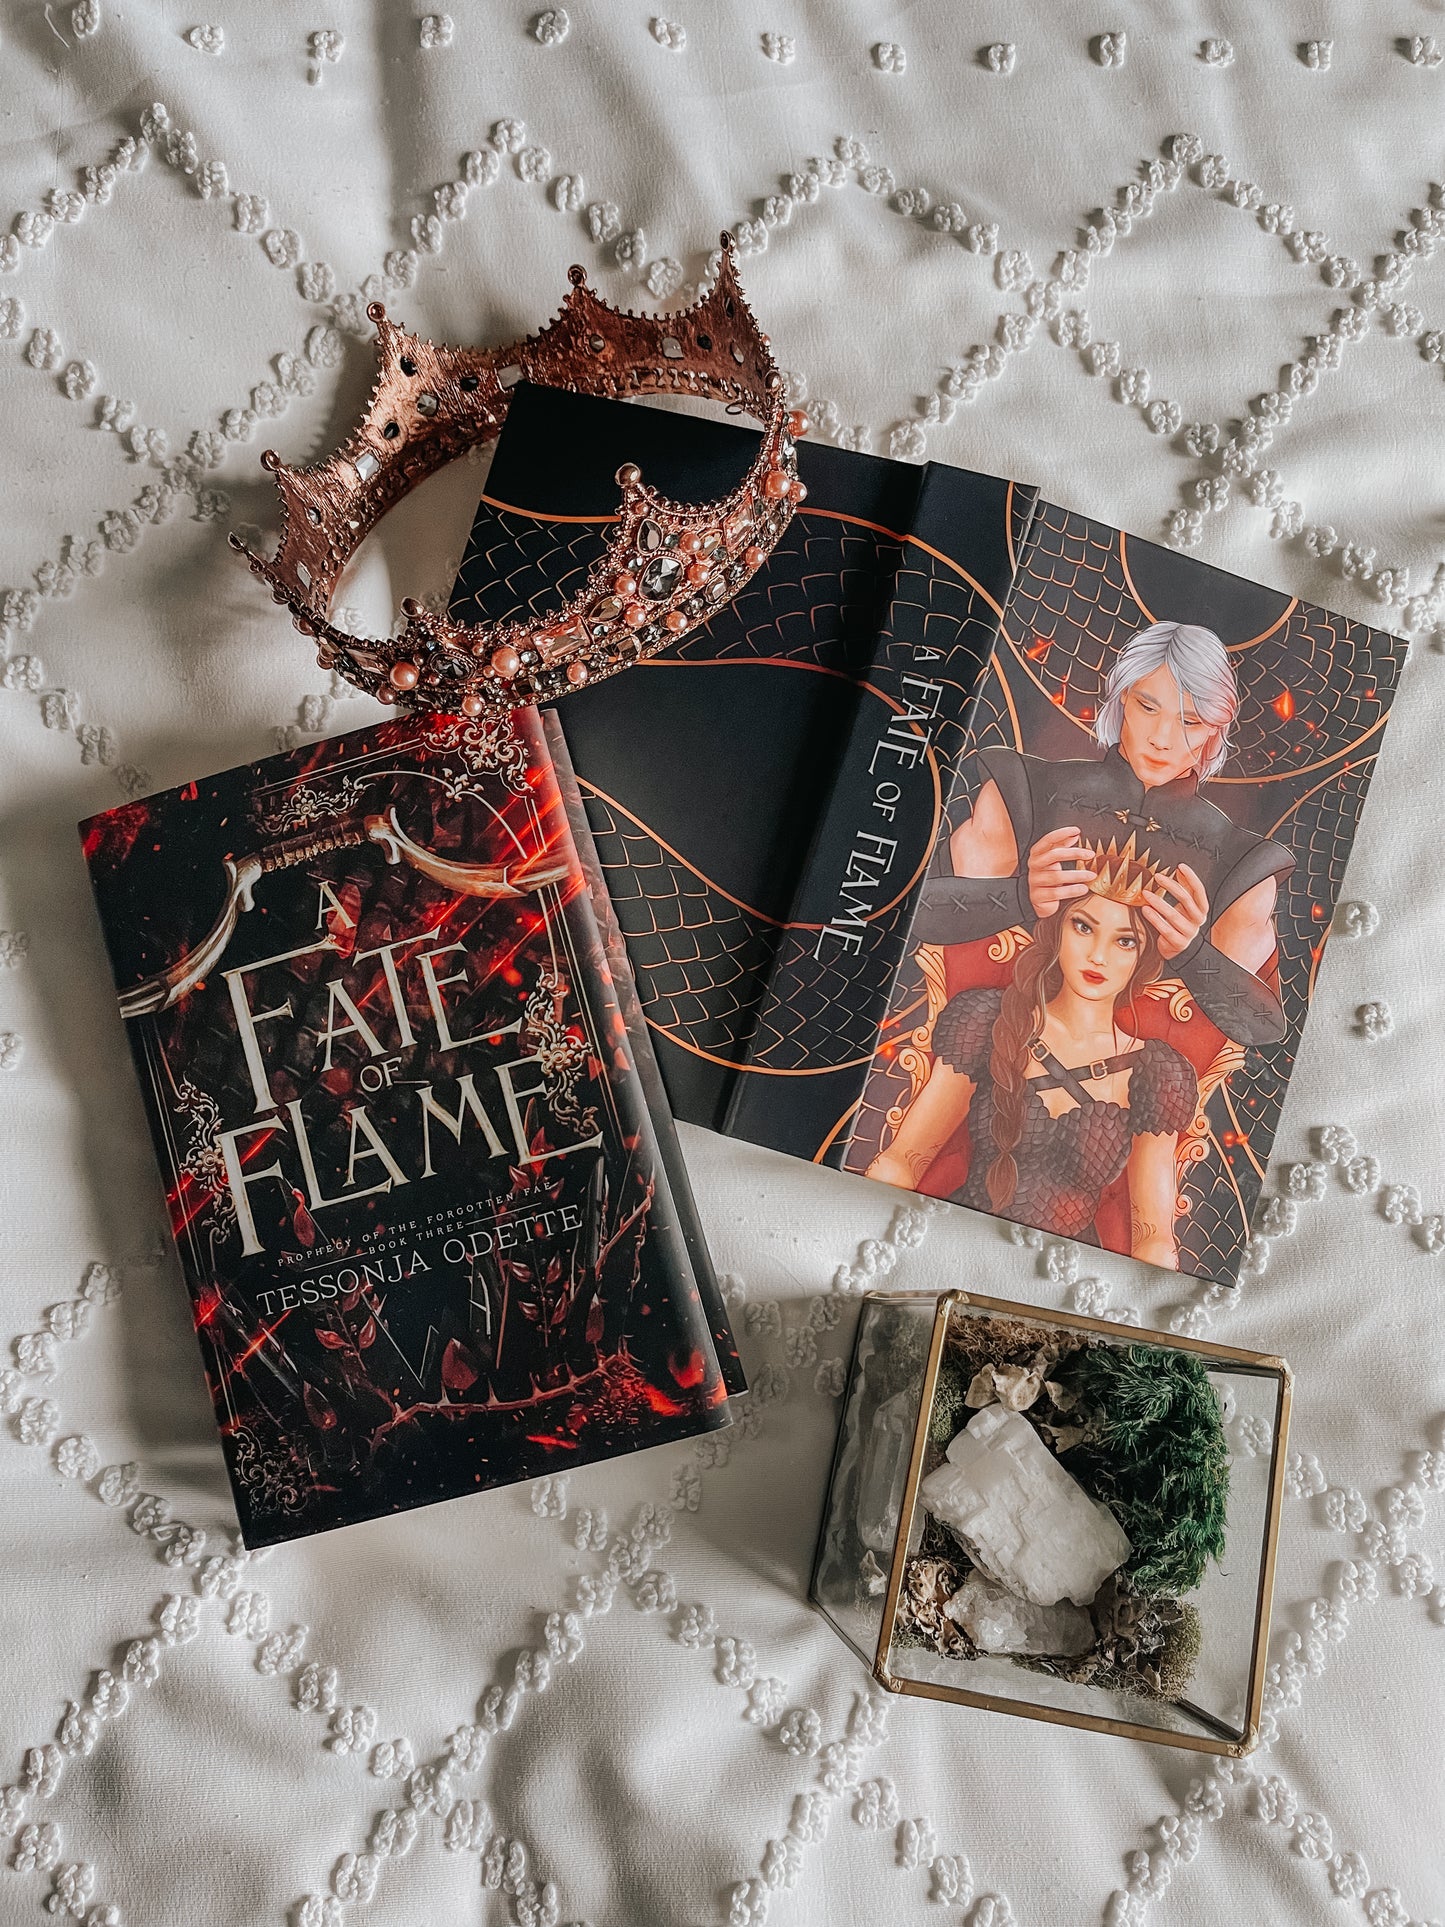 A Fate of Flame (hardcover) signed